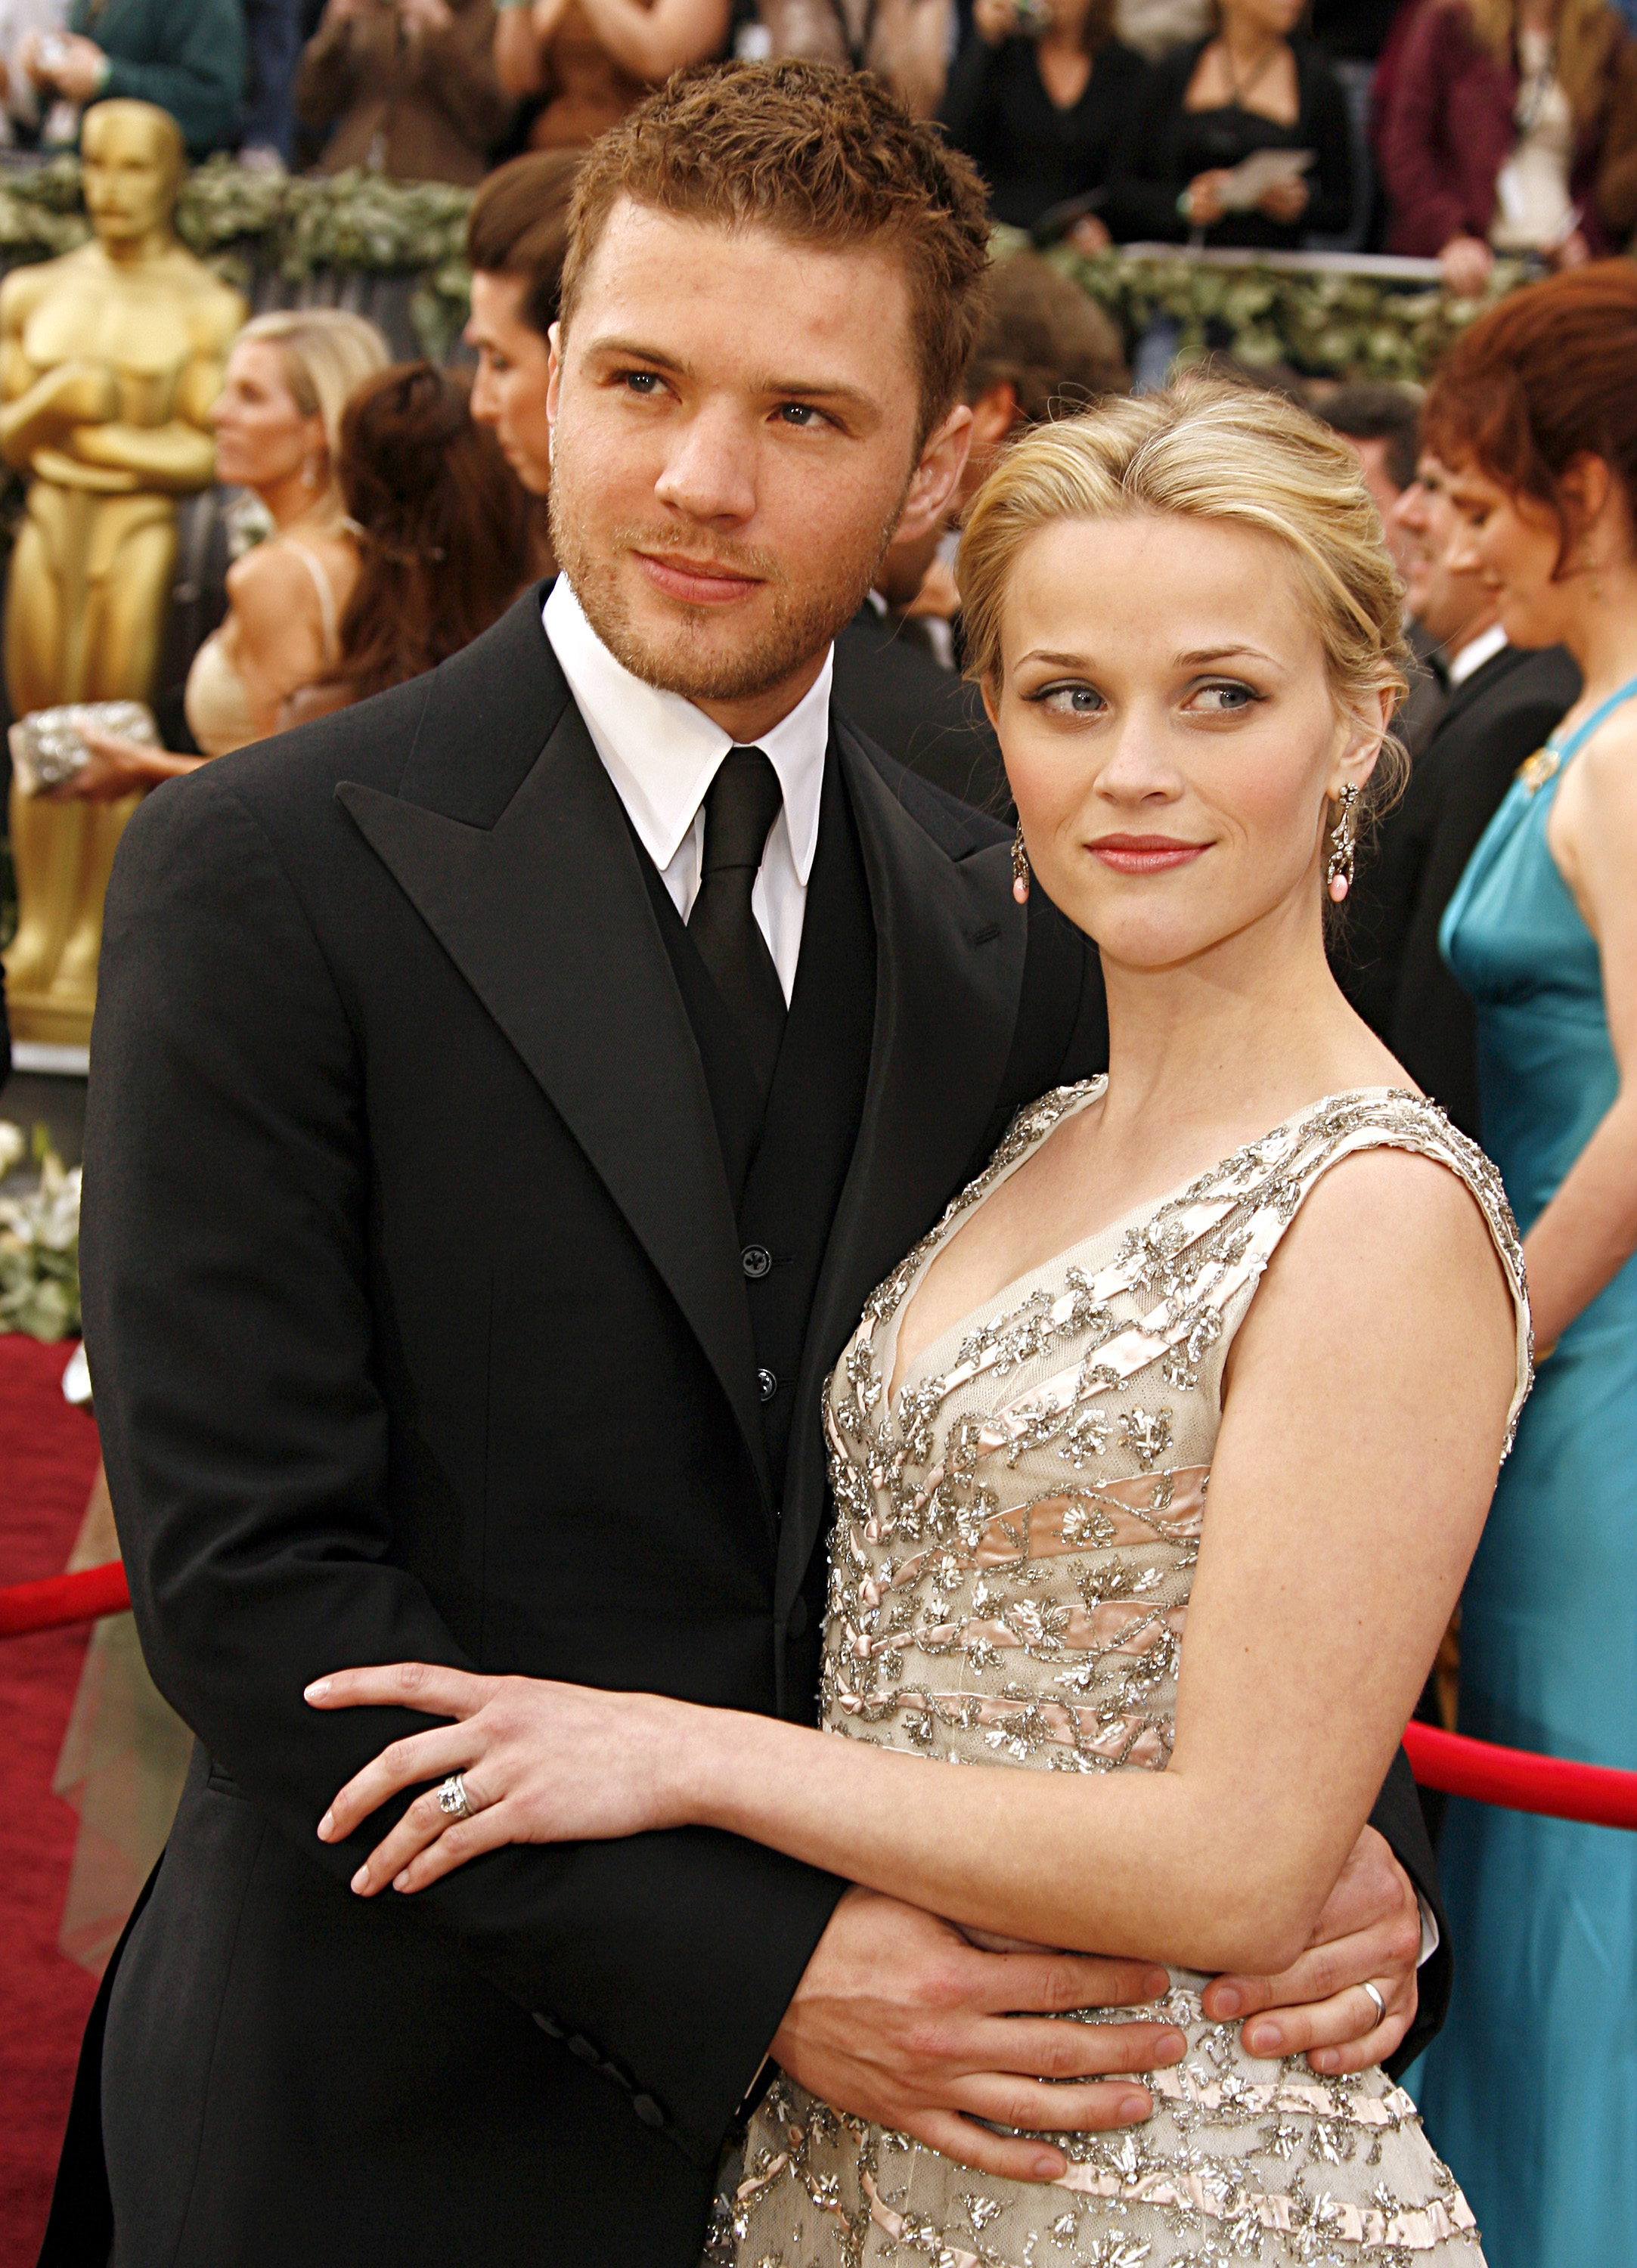 Ryan Phillippe and Reese Witherspoon at the Kodak Theatre in Hollywood, California | Source: Getty Images